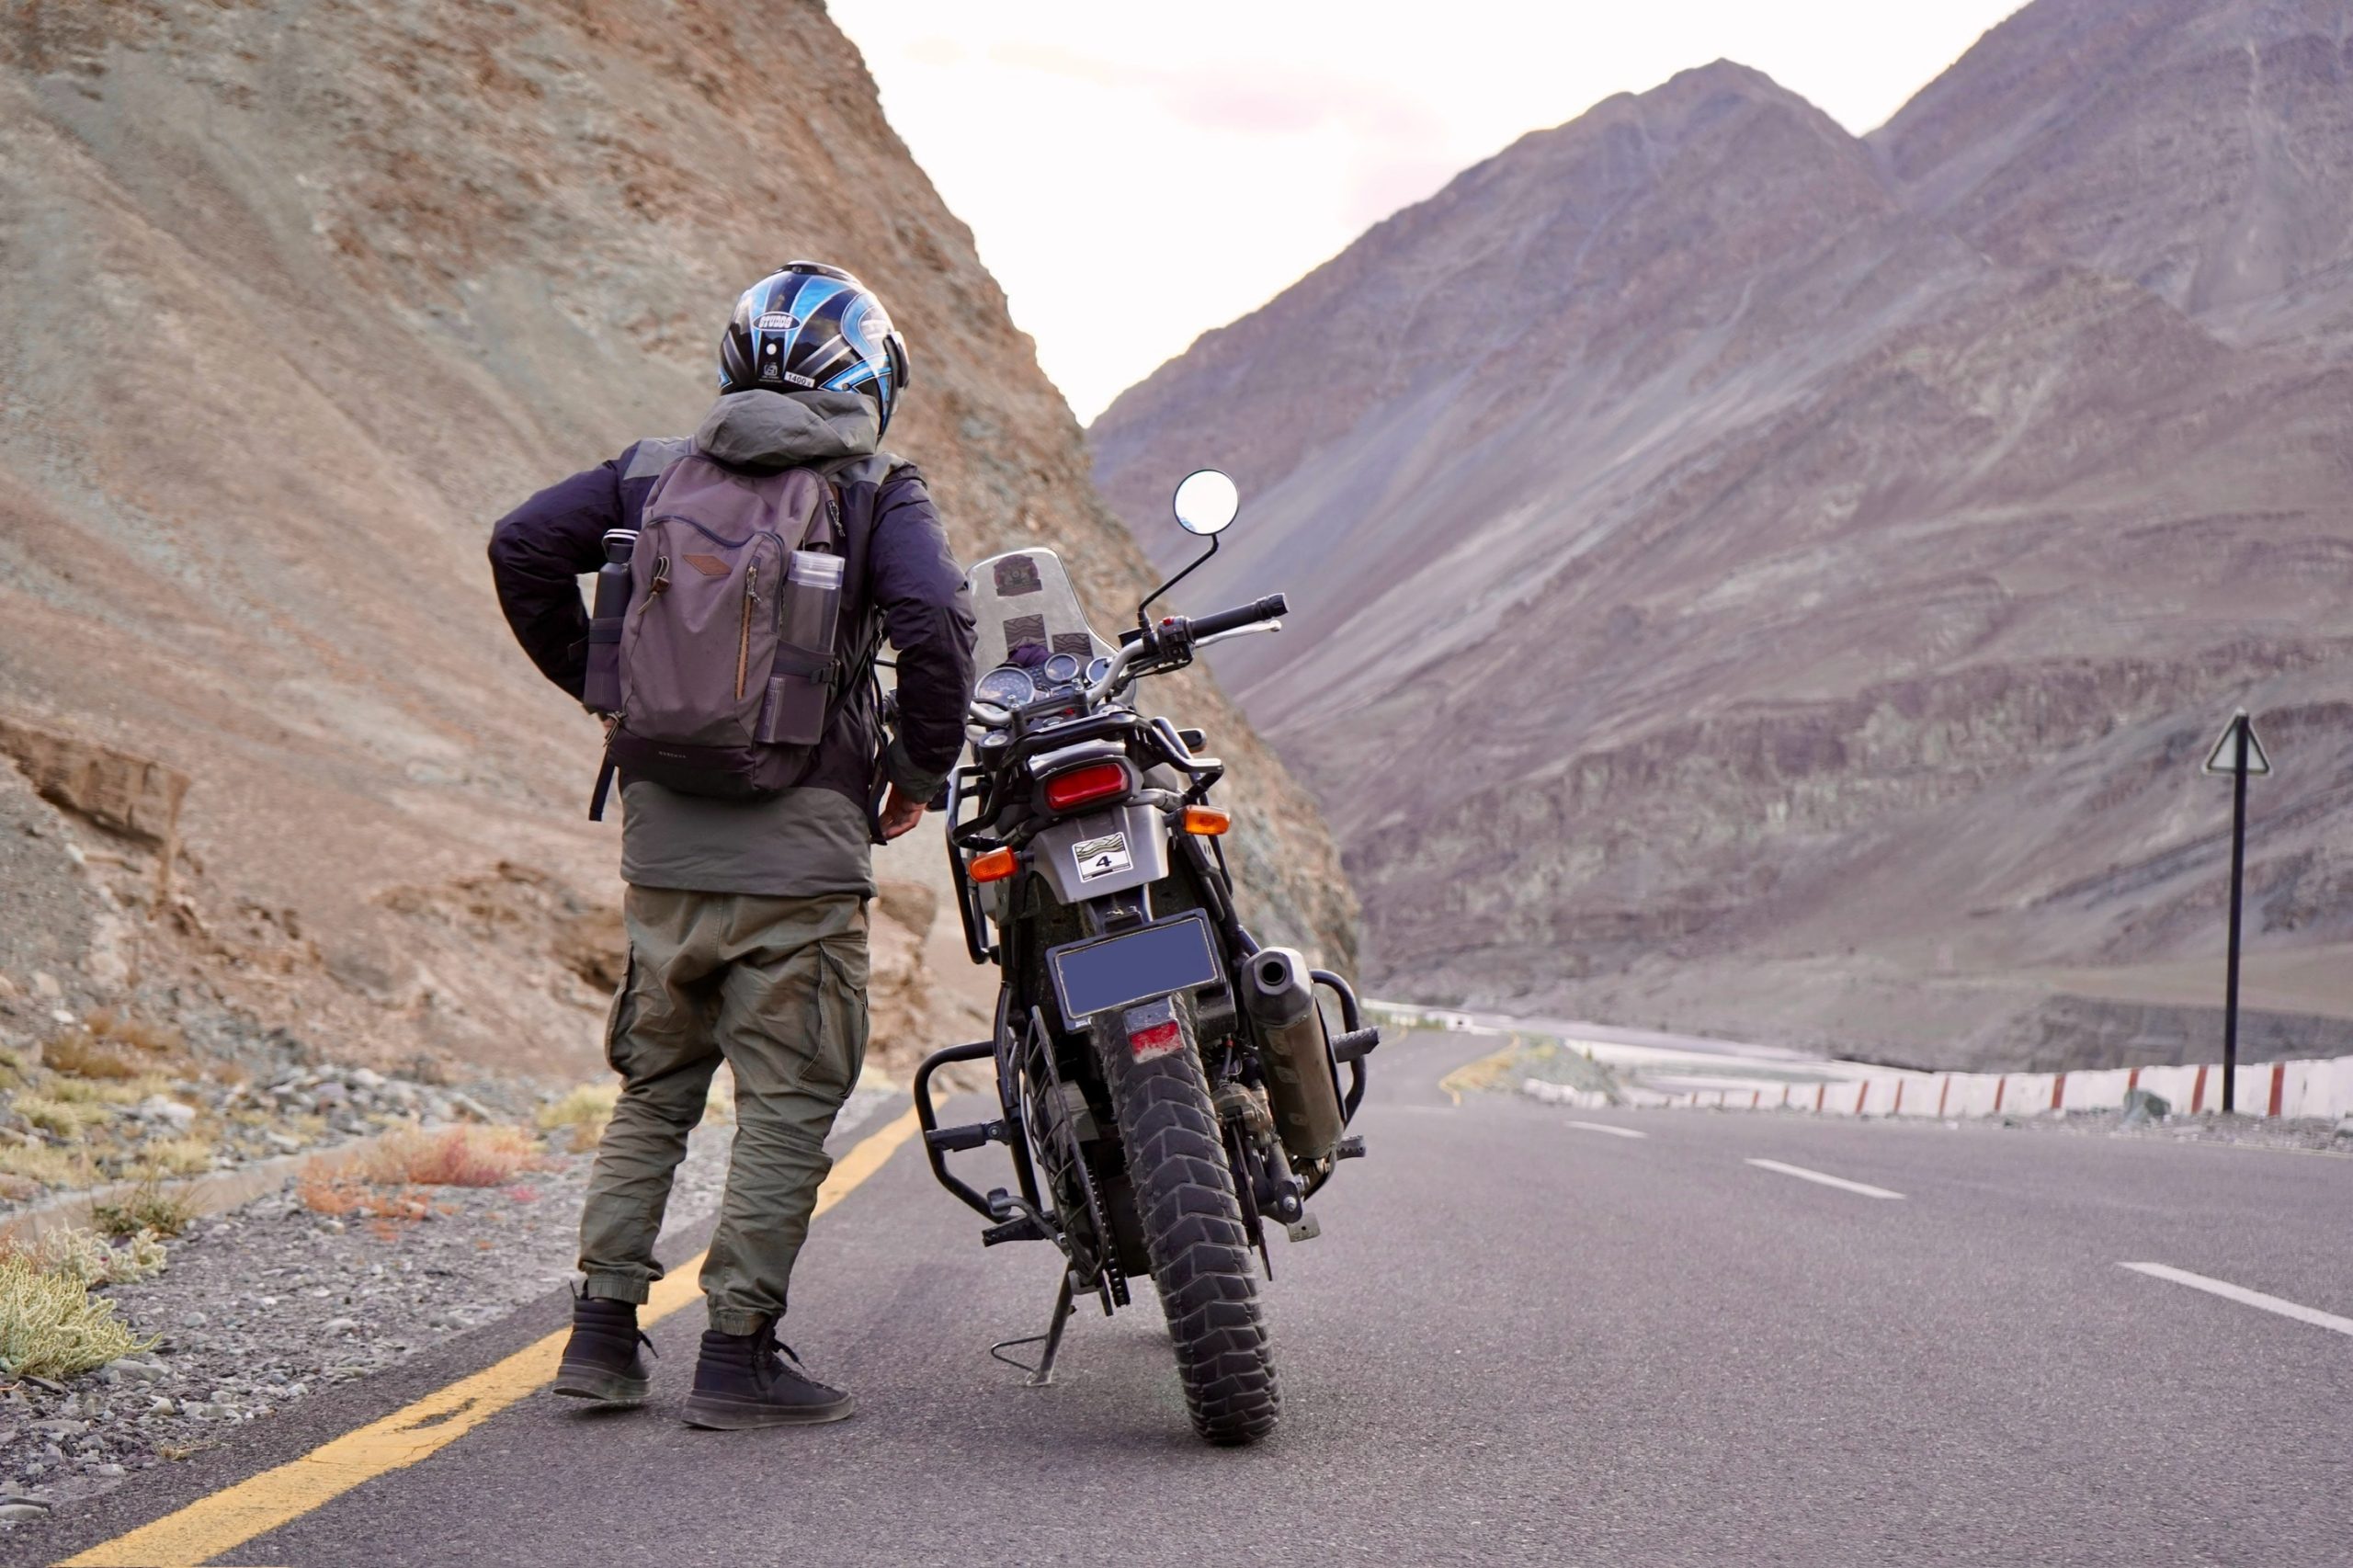 "Exploring the Unstoppable: A Journey with the Tenere 700"